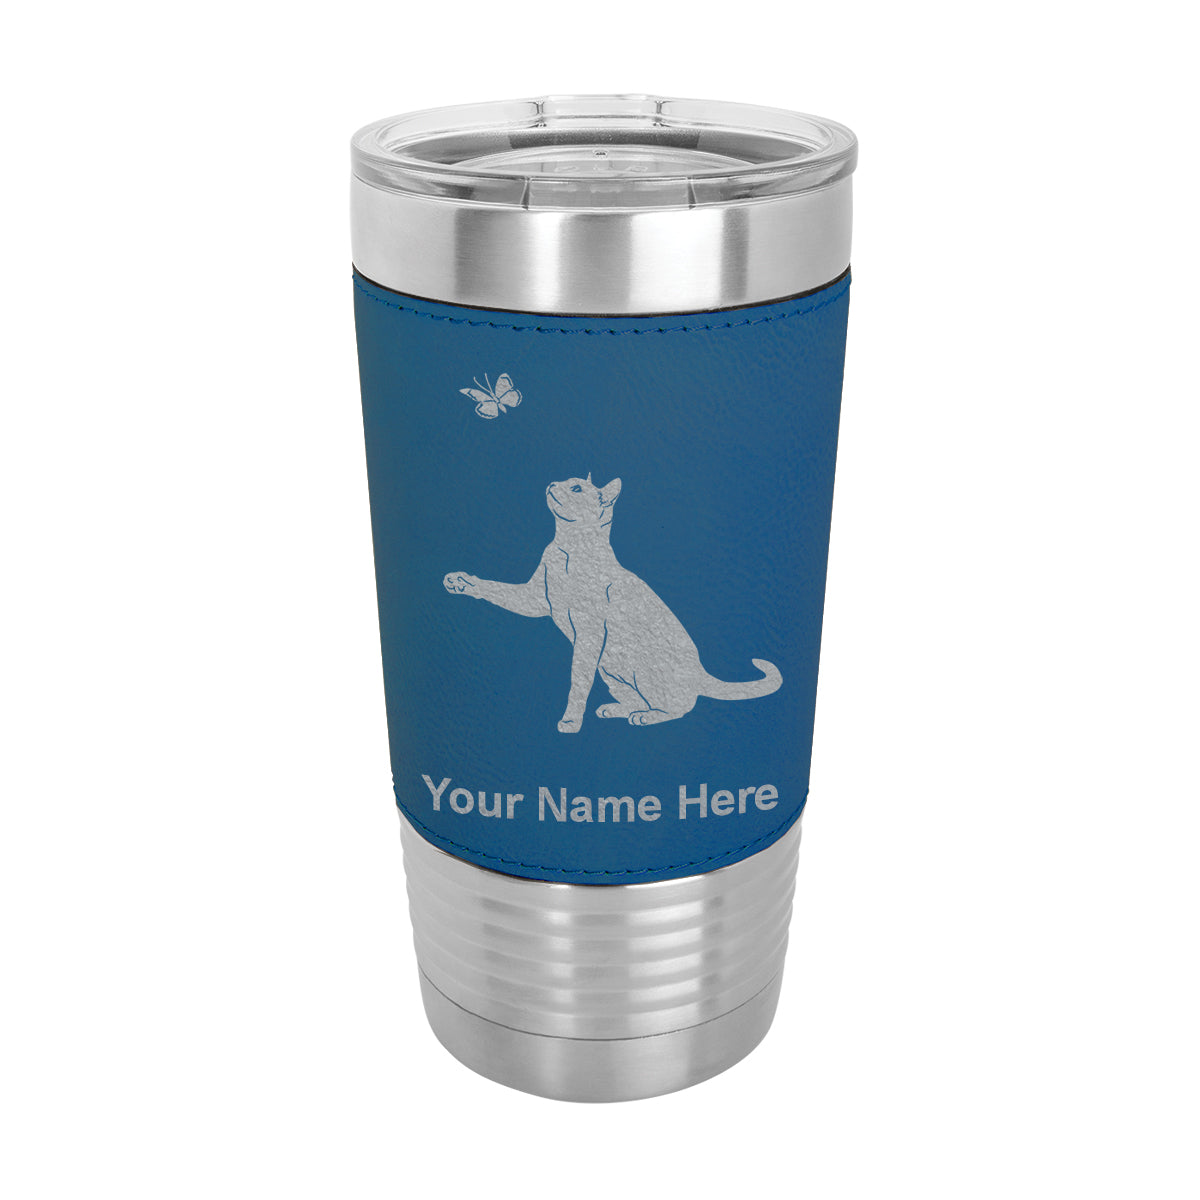 20oz Faux Leather Tumbler Mug, Cat with Butterfly, Personalized Engraving Included - LaserGram Custom Engraved Gifts